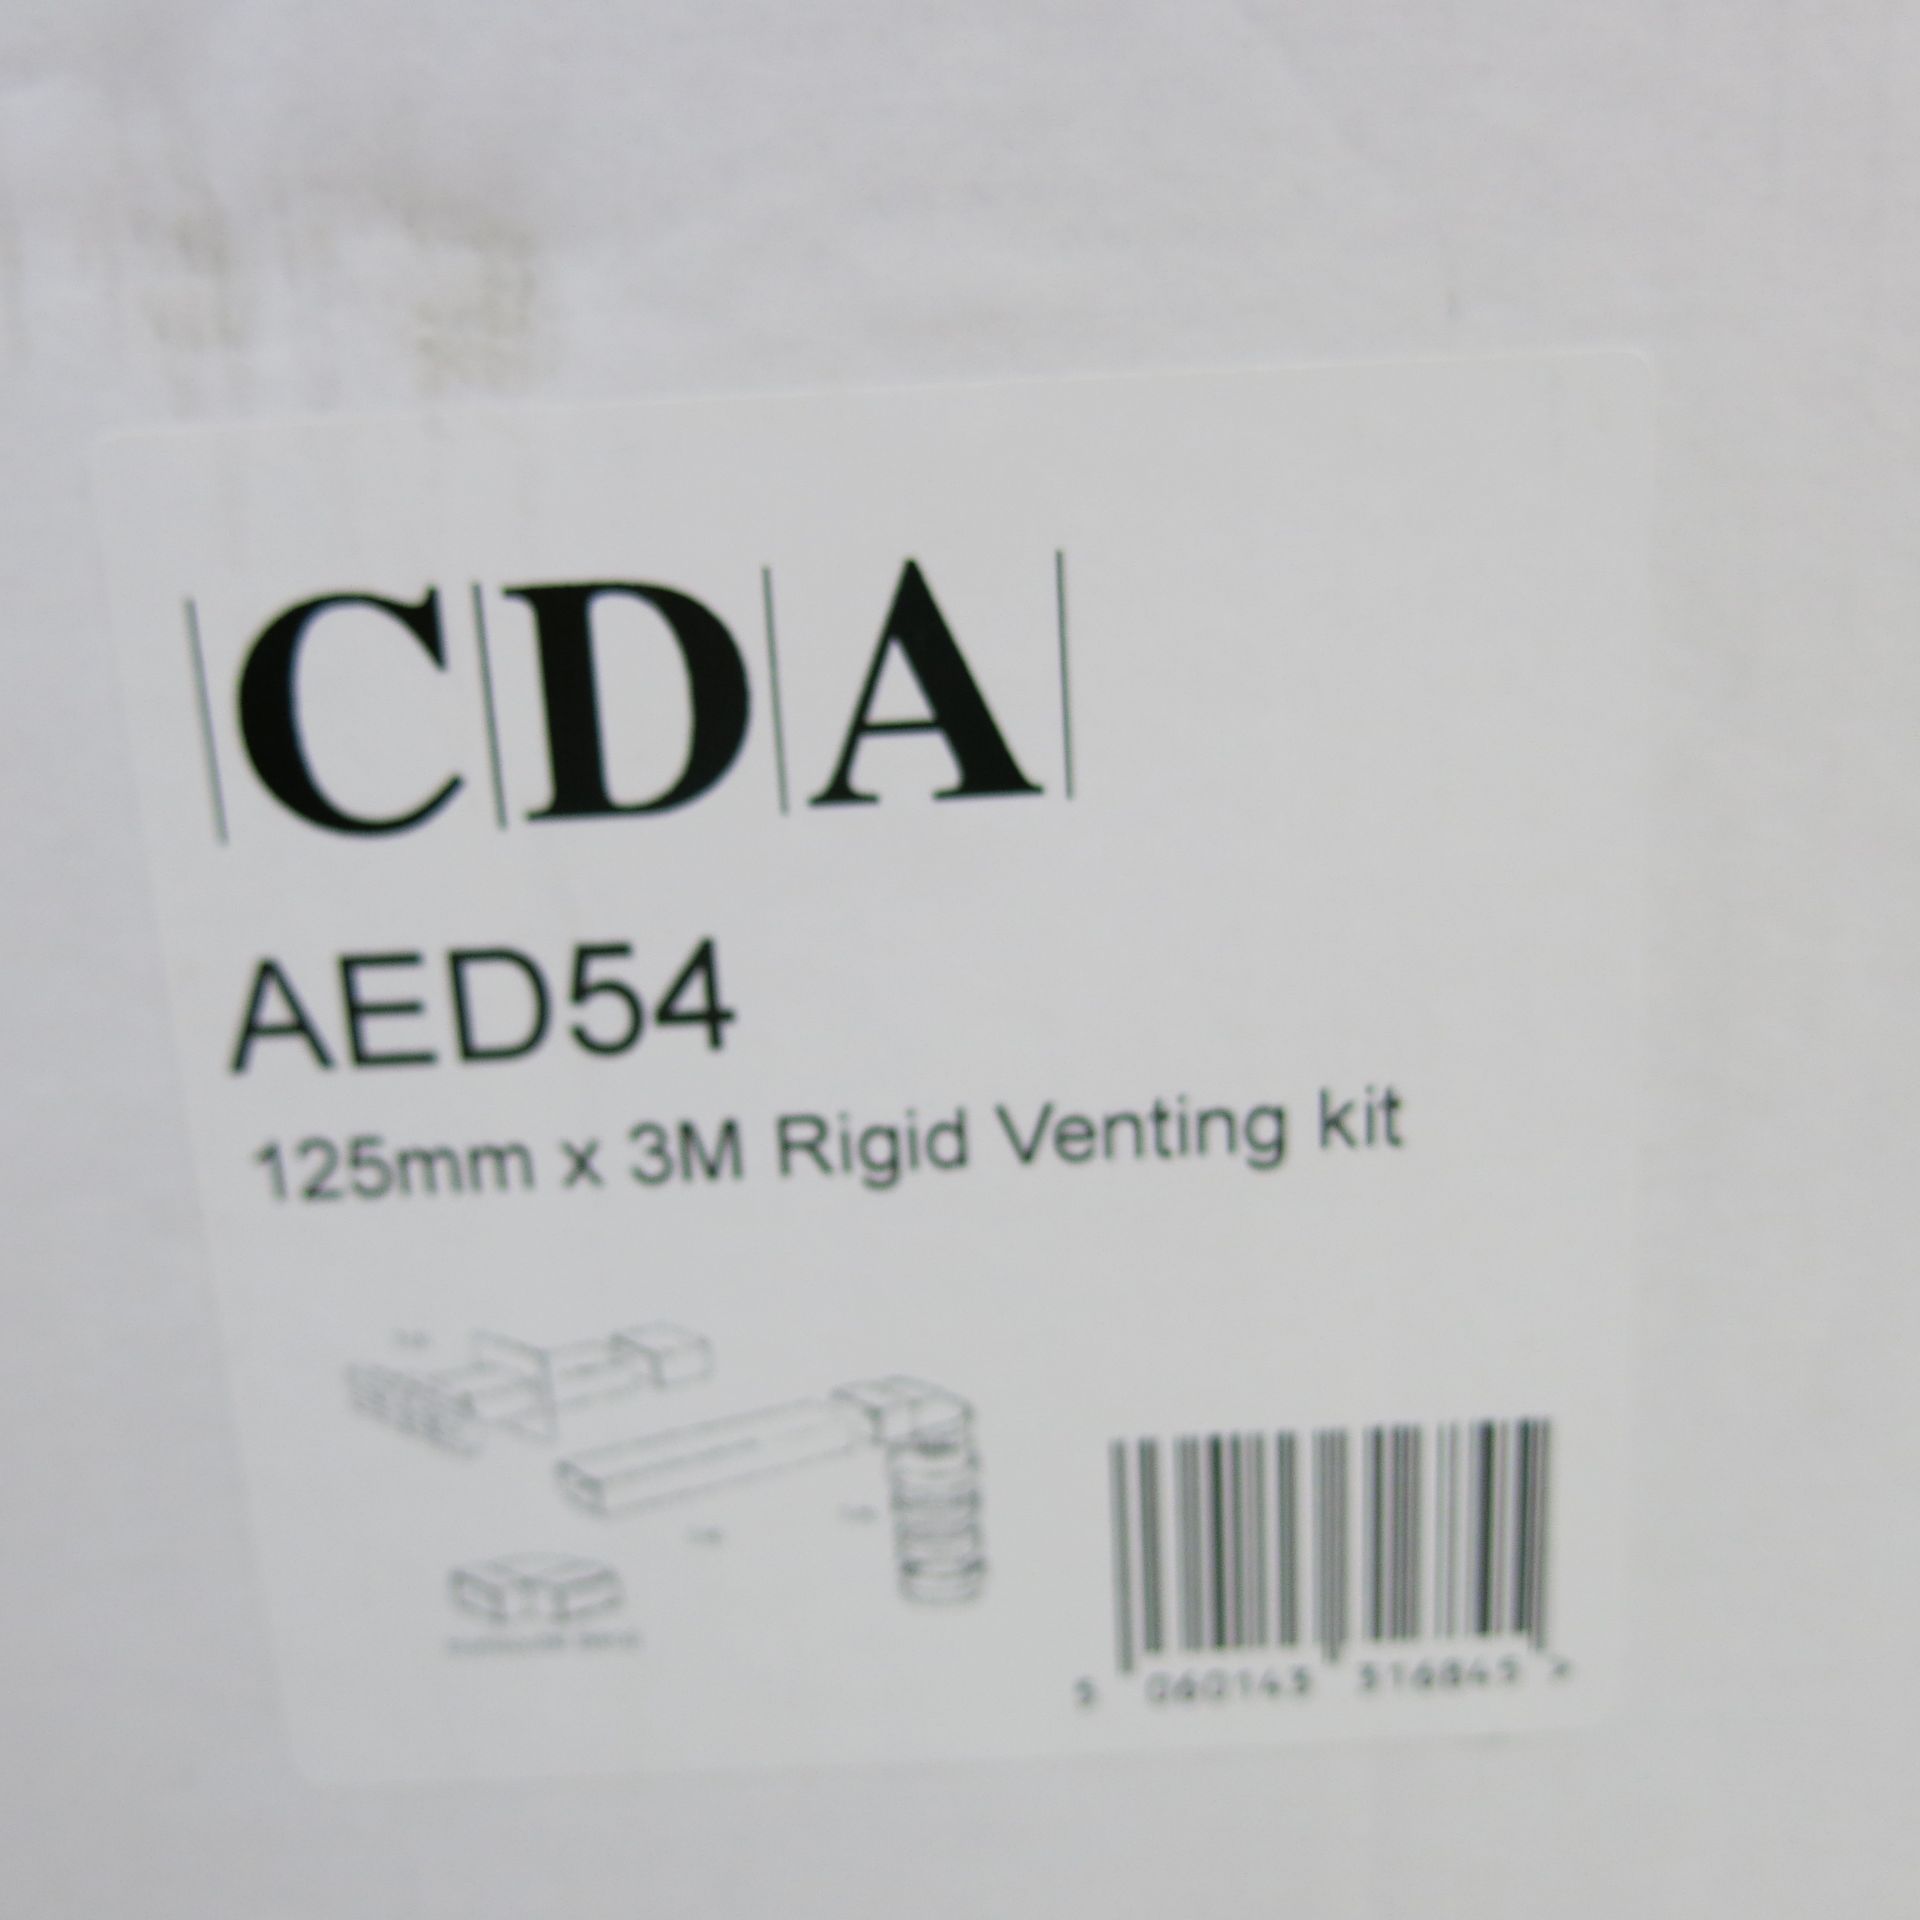 CDA 125mm x 3m Rigid Venting Kit, Model AED54. Boxed As New. - Image 2 of 3